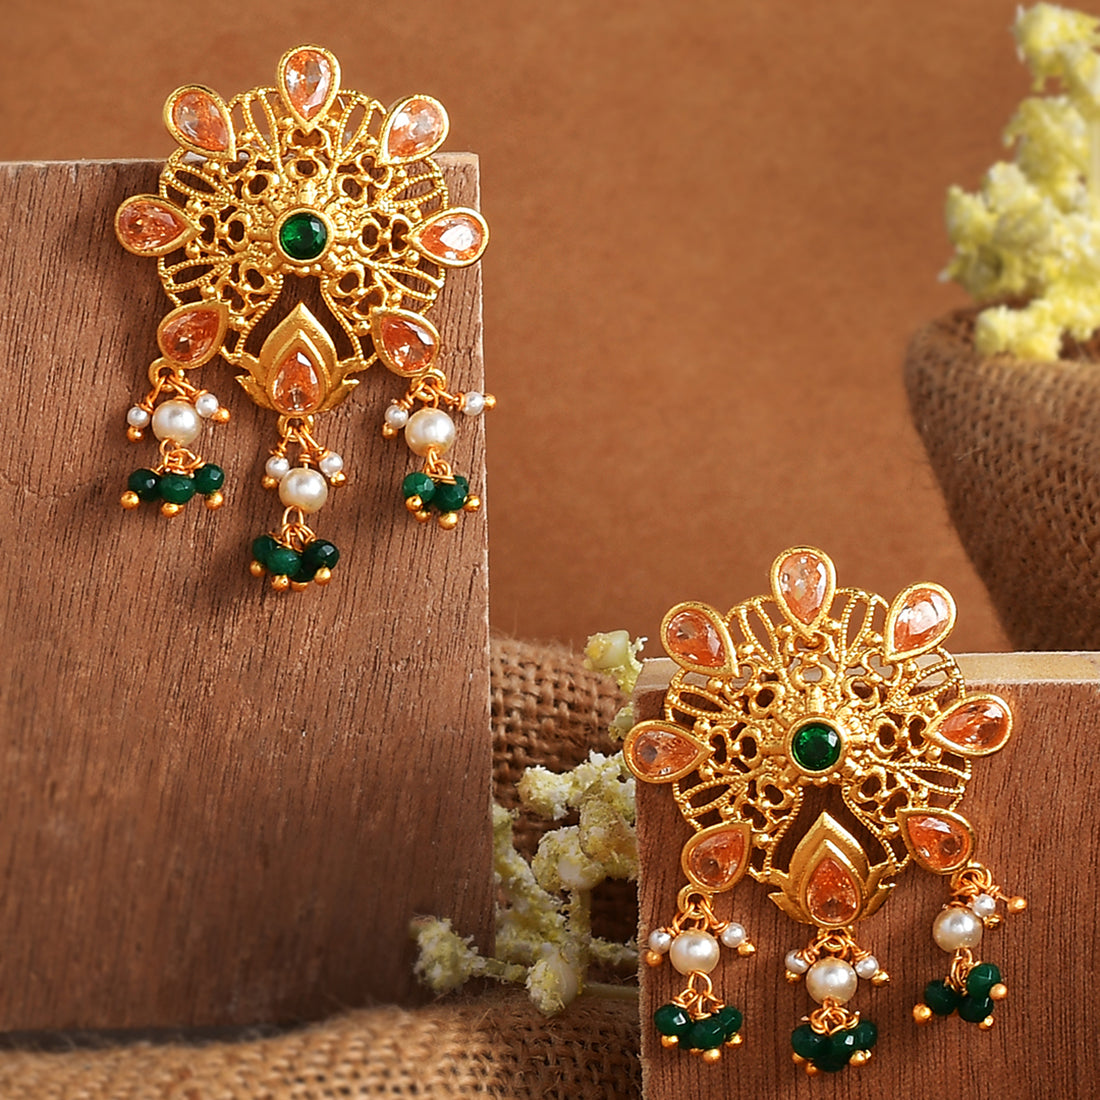 Women's Abharan Pink And Green Stones Floral Stud Earrings - Voylla